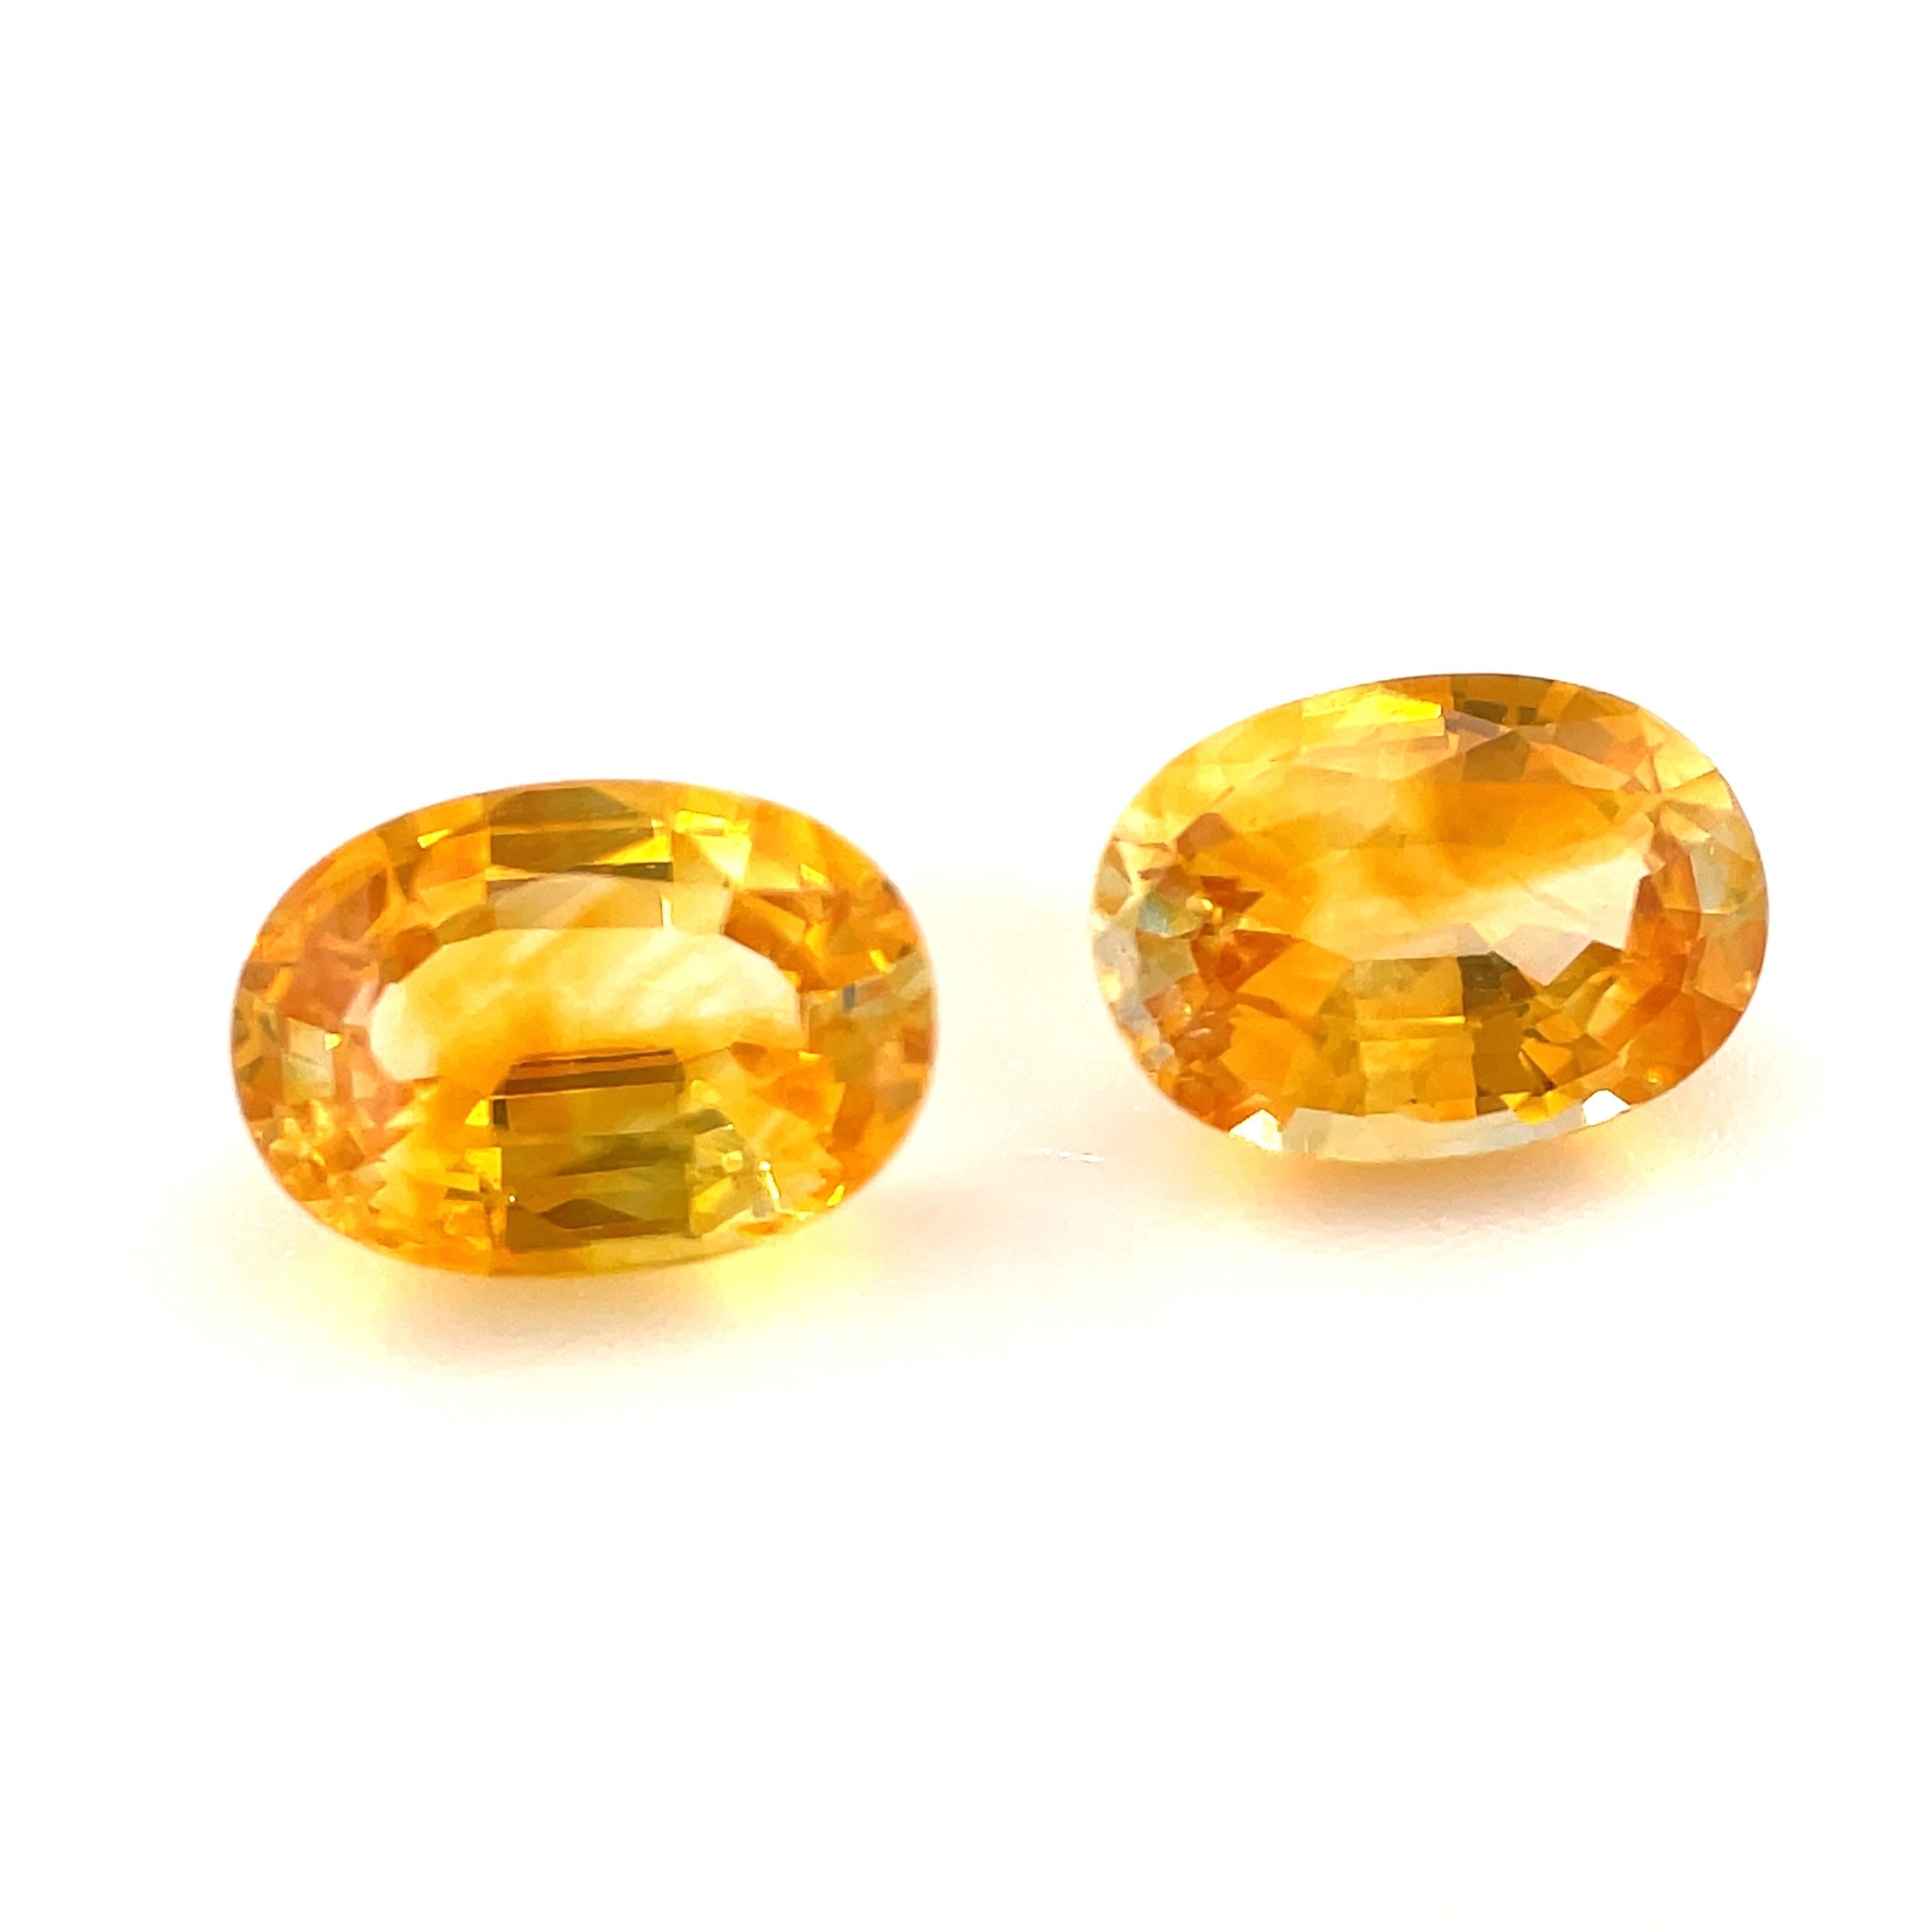 This sparkling pair of warm, golden yellow sapphires are like crystallized sunshine! Weighing 1.92 carats total, these gems have beautiful, rich color and they are eye-clean. They are extremely well-proportioned ovals that will lend themselves to